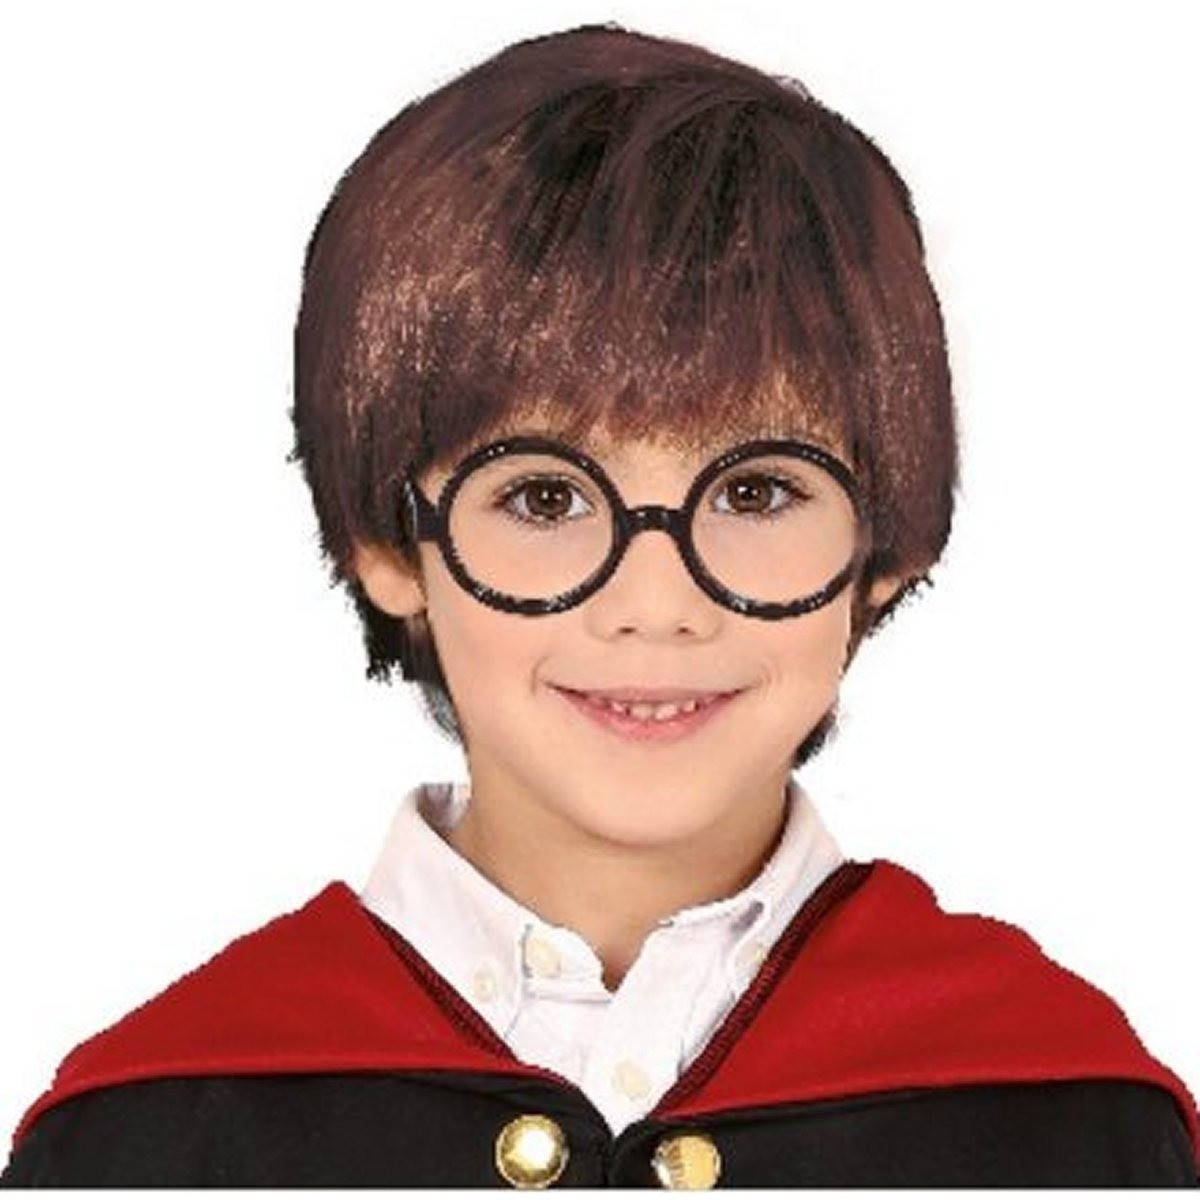 Parrucca Harry Potter bambino